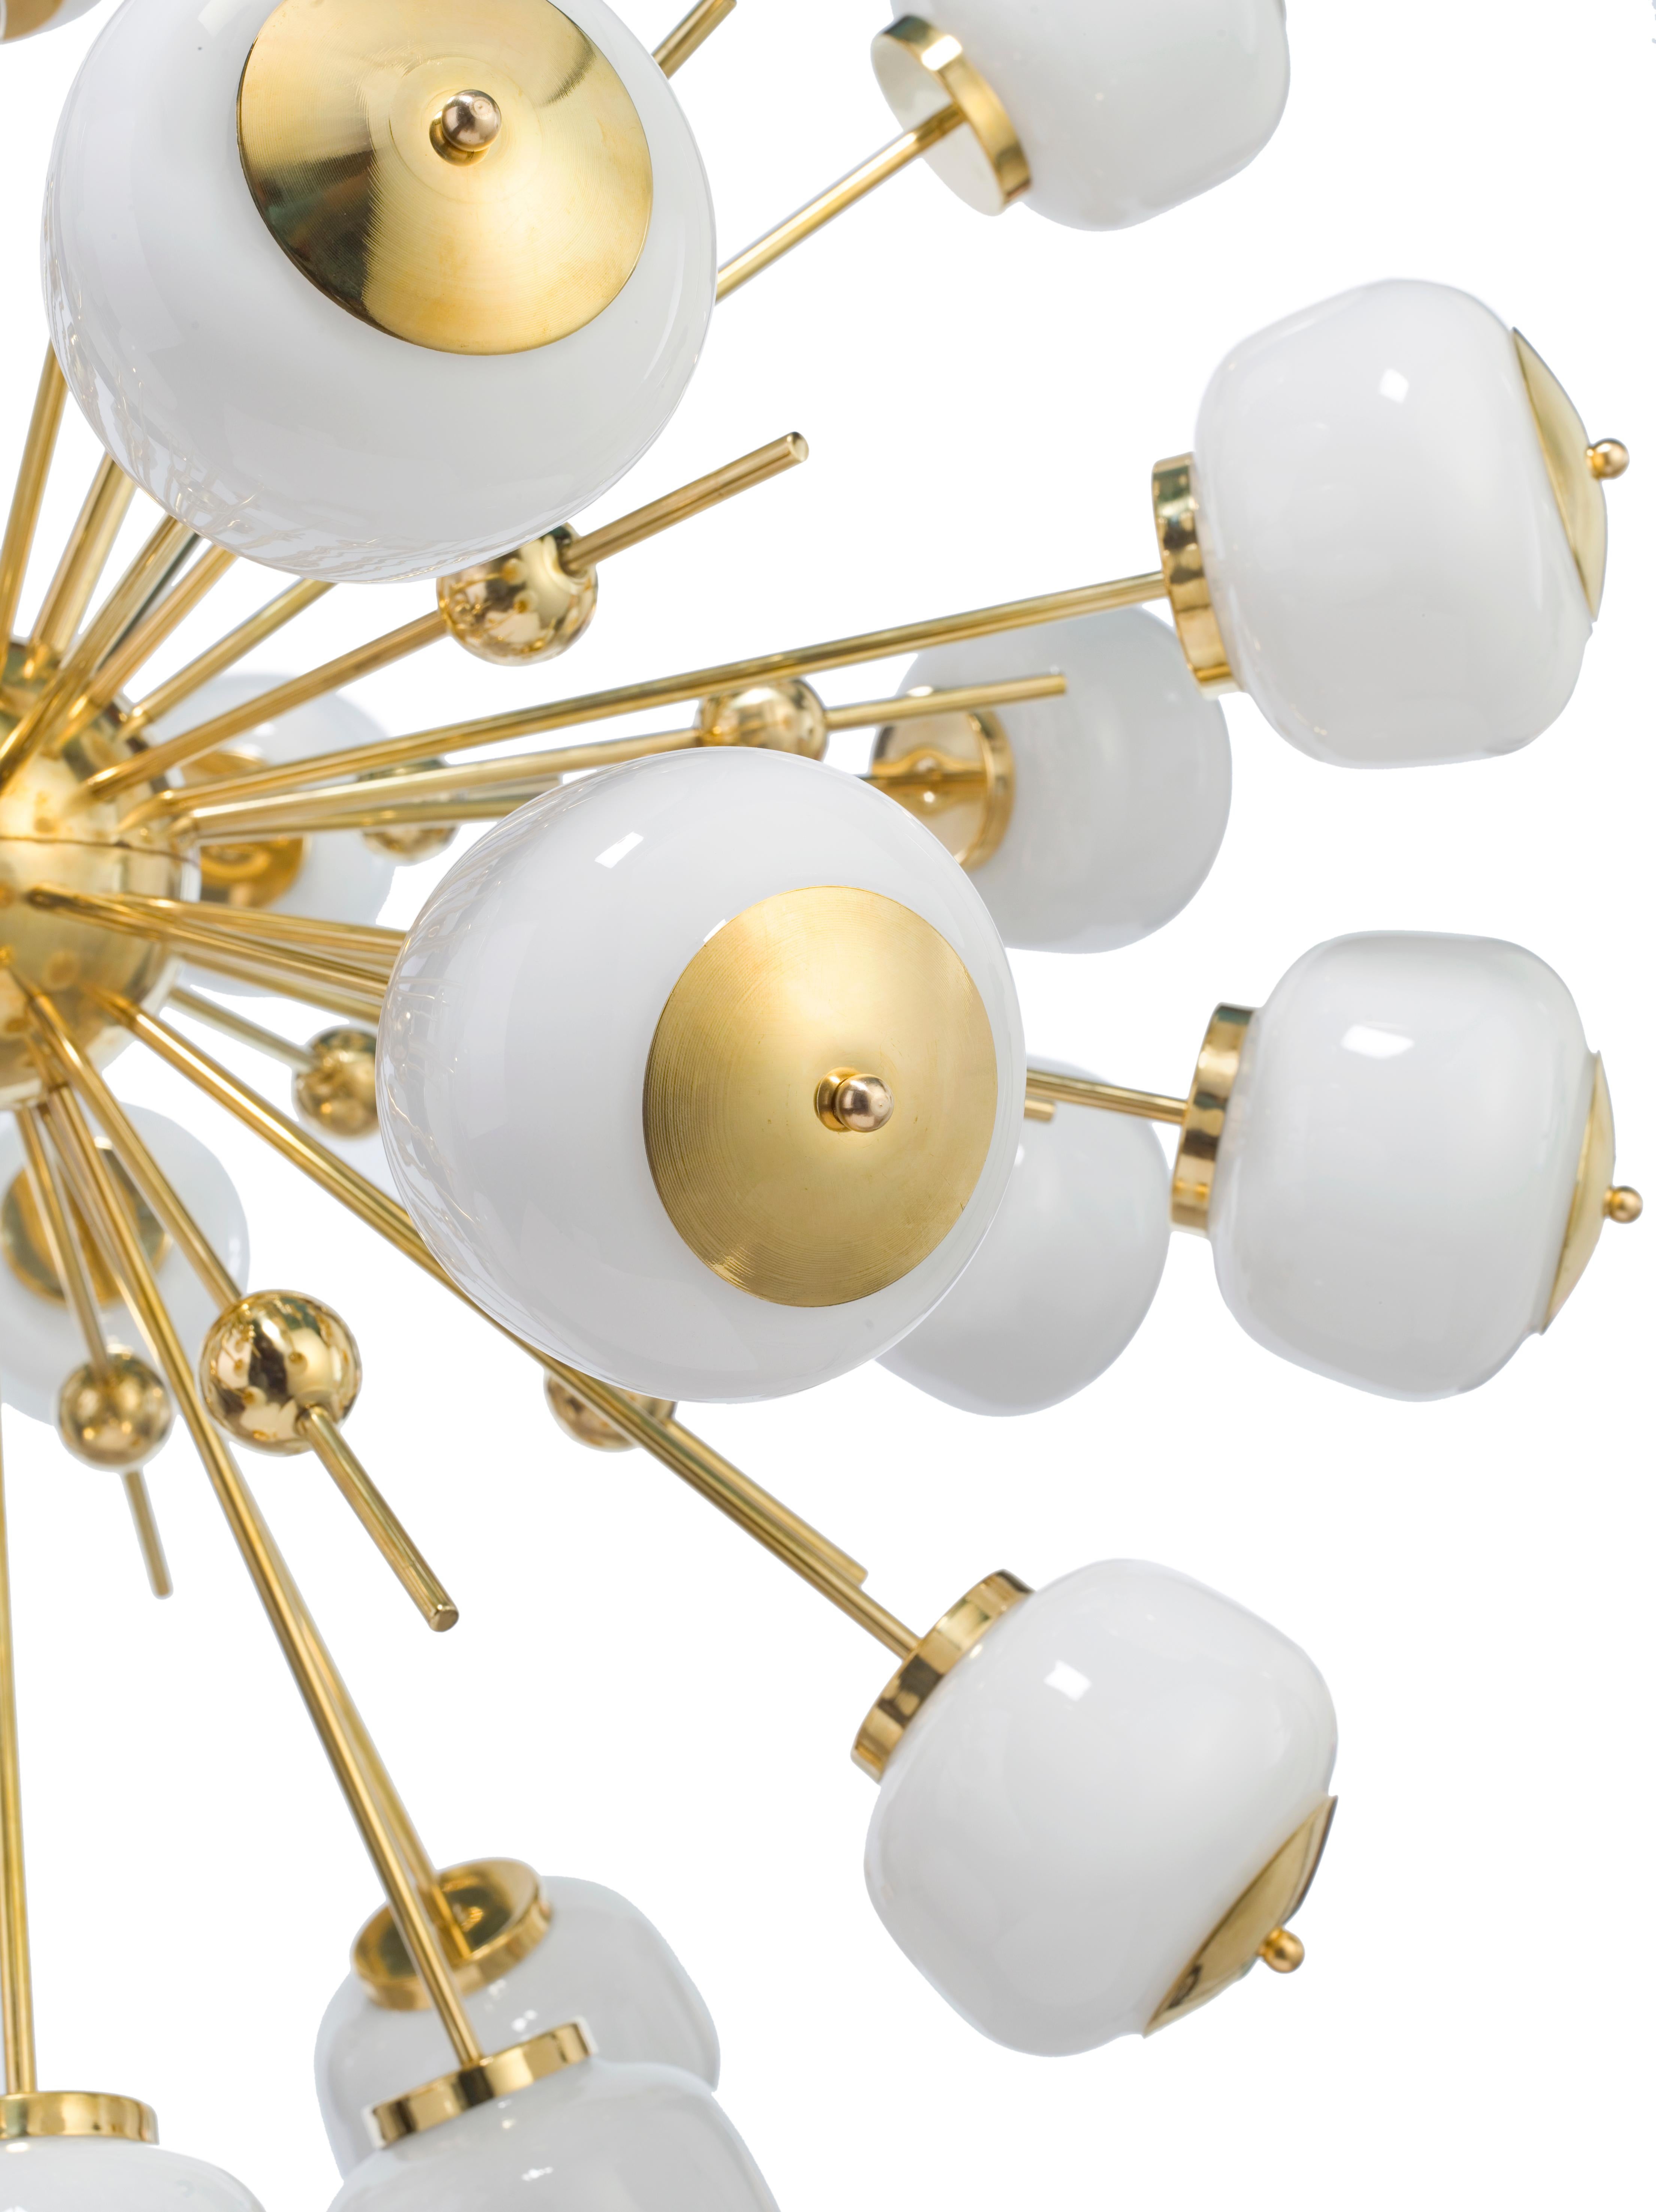 Contemporary Mid-Century Modern Style, Sputnik Chandelier with Murano Glass Orbs (US Spec)